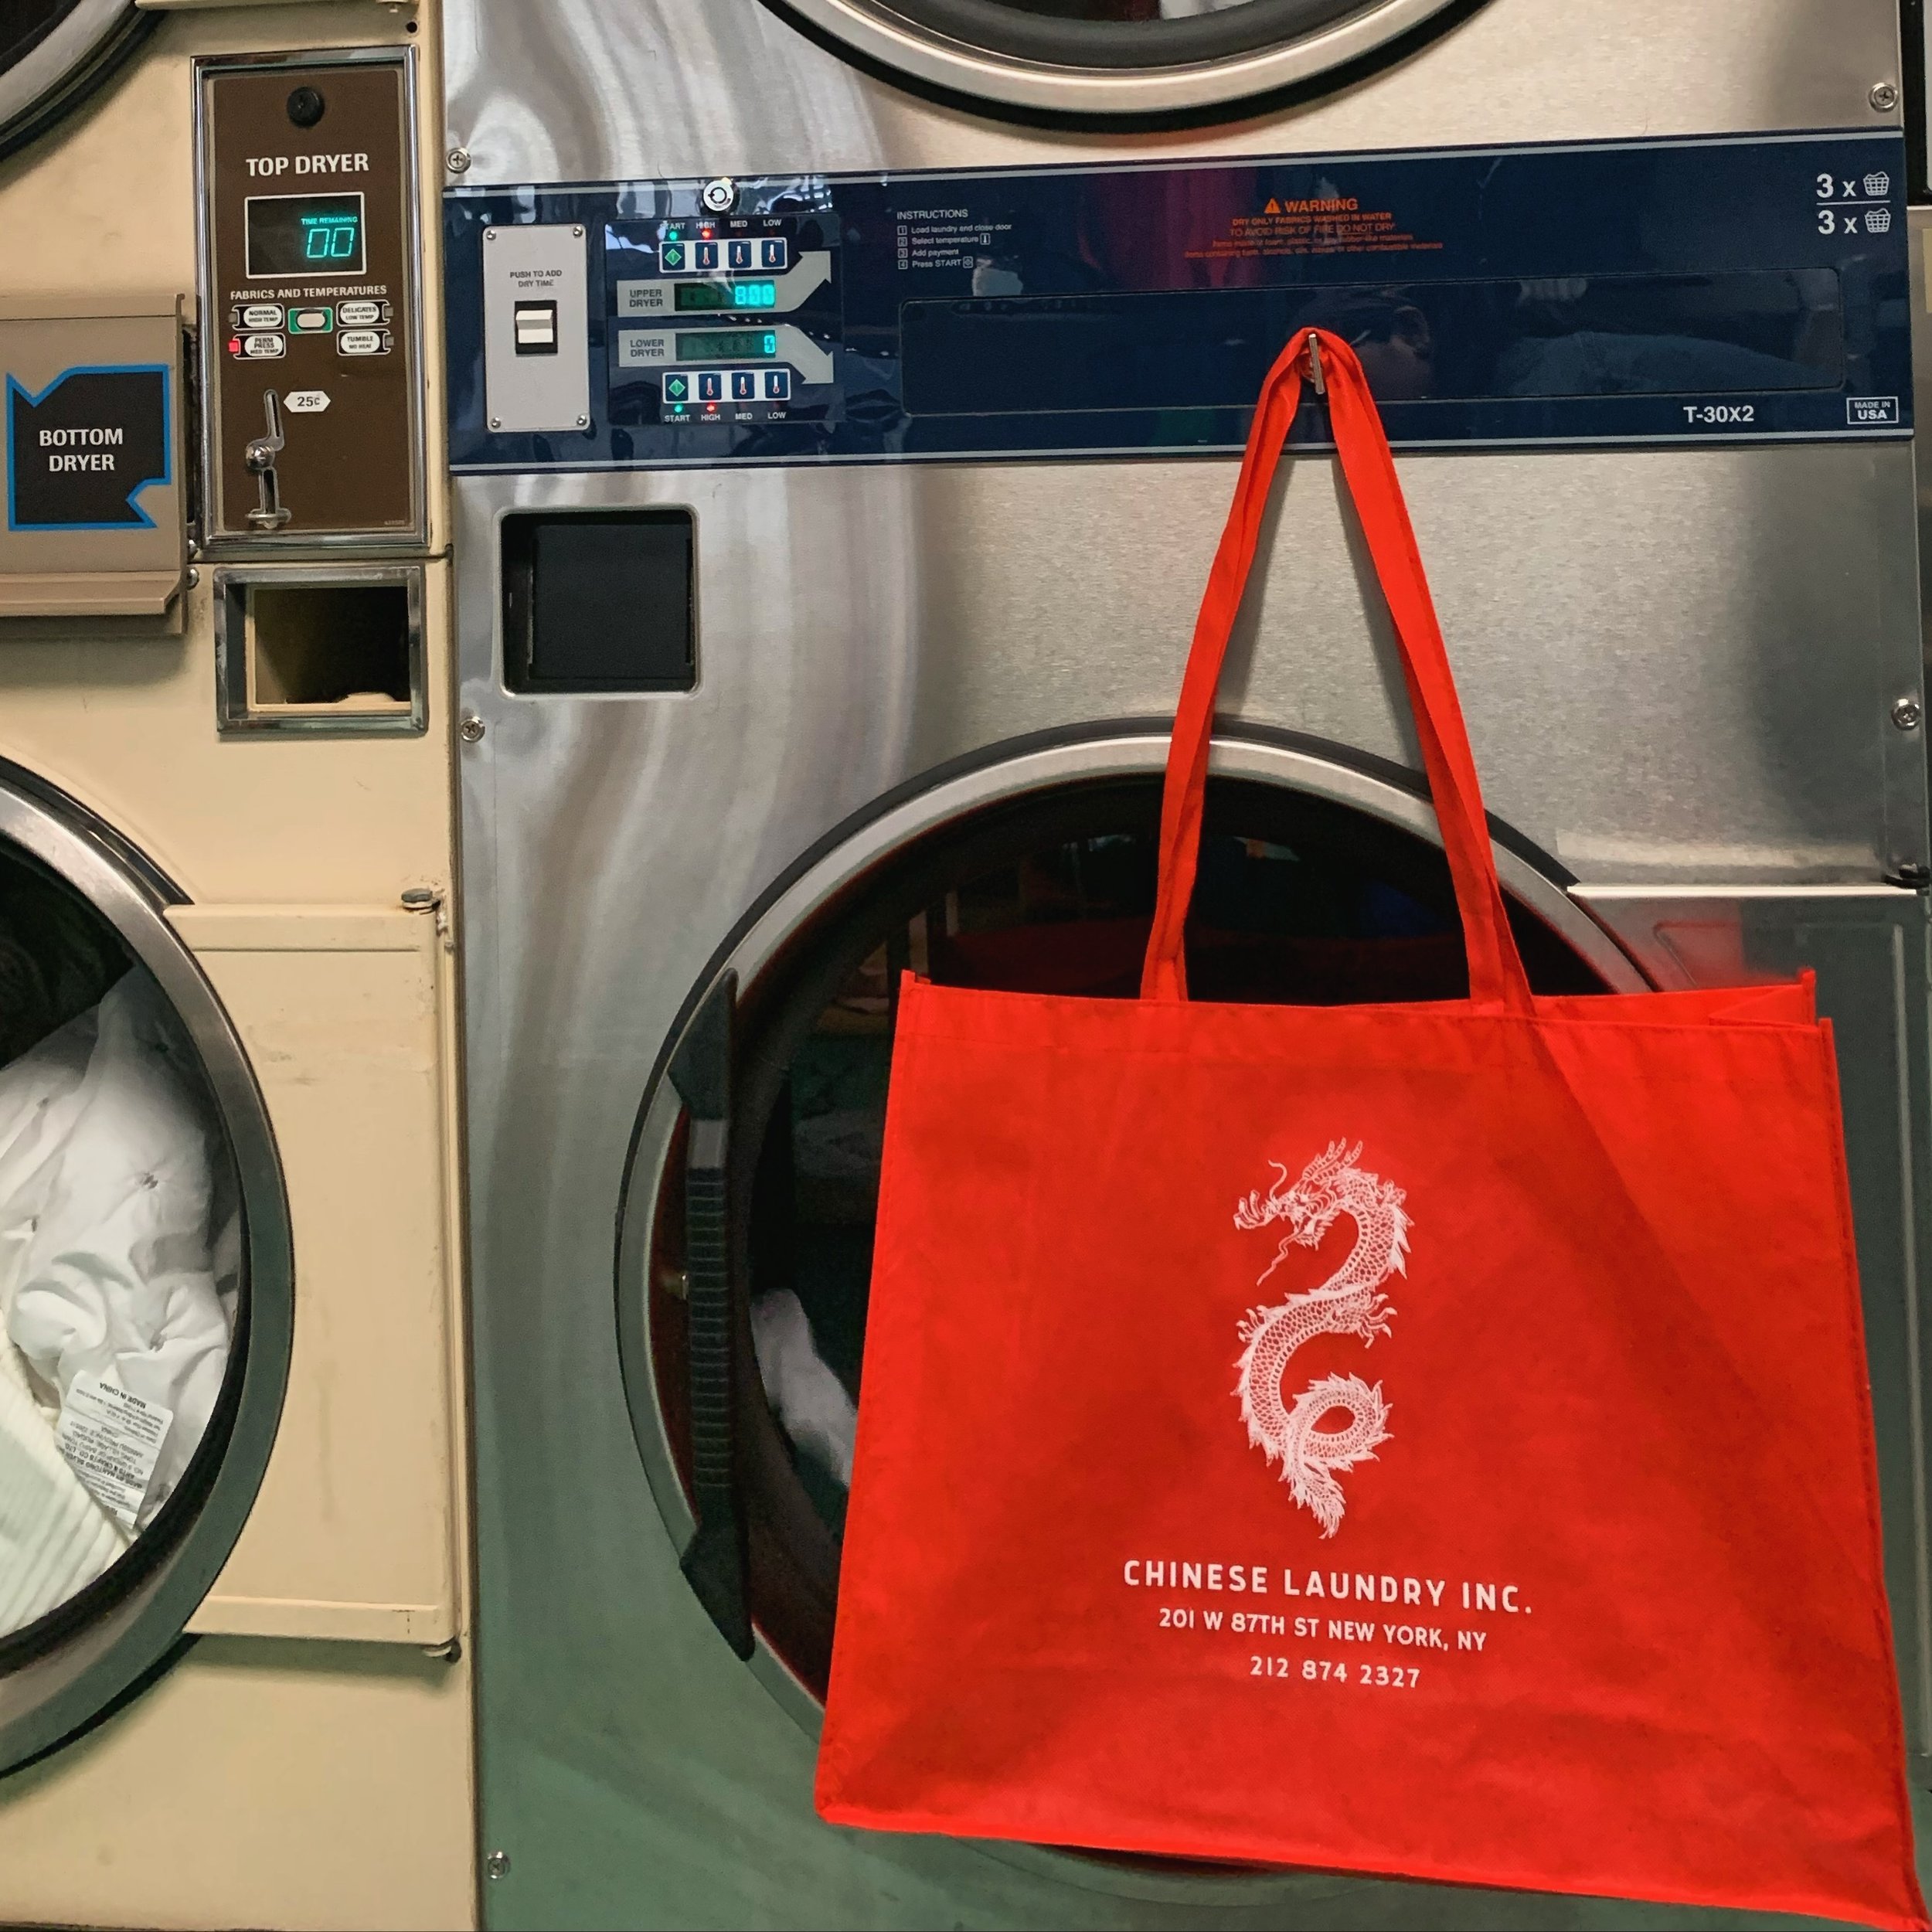 Rediscover the lost art of Chinese Laundry with us. Call or text us to schedule a laundry or dry cleaning pickup🐉❤️🧺
.
.
.
#enterthedragon #laundry #washandfold #washandpress #handfinished #handmade #dryclean #nyc #newyorkcity #mahnattan #pickup #d